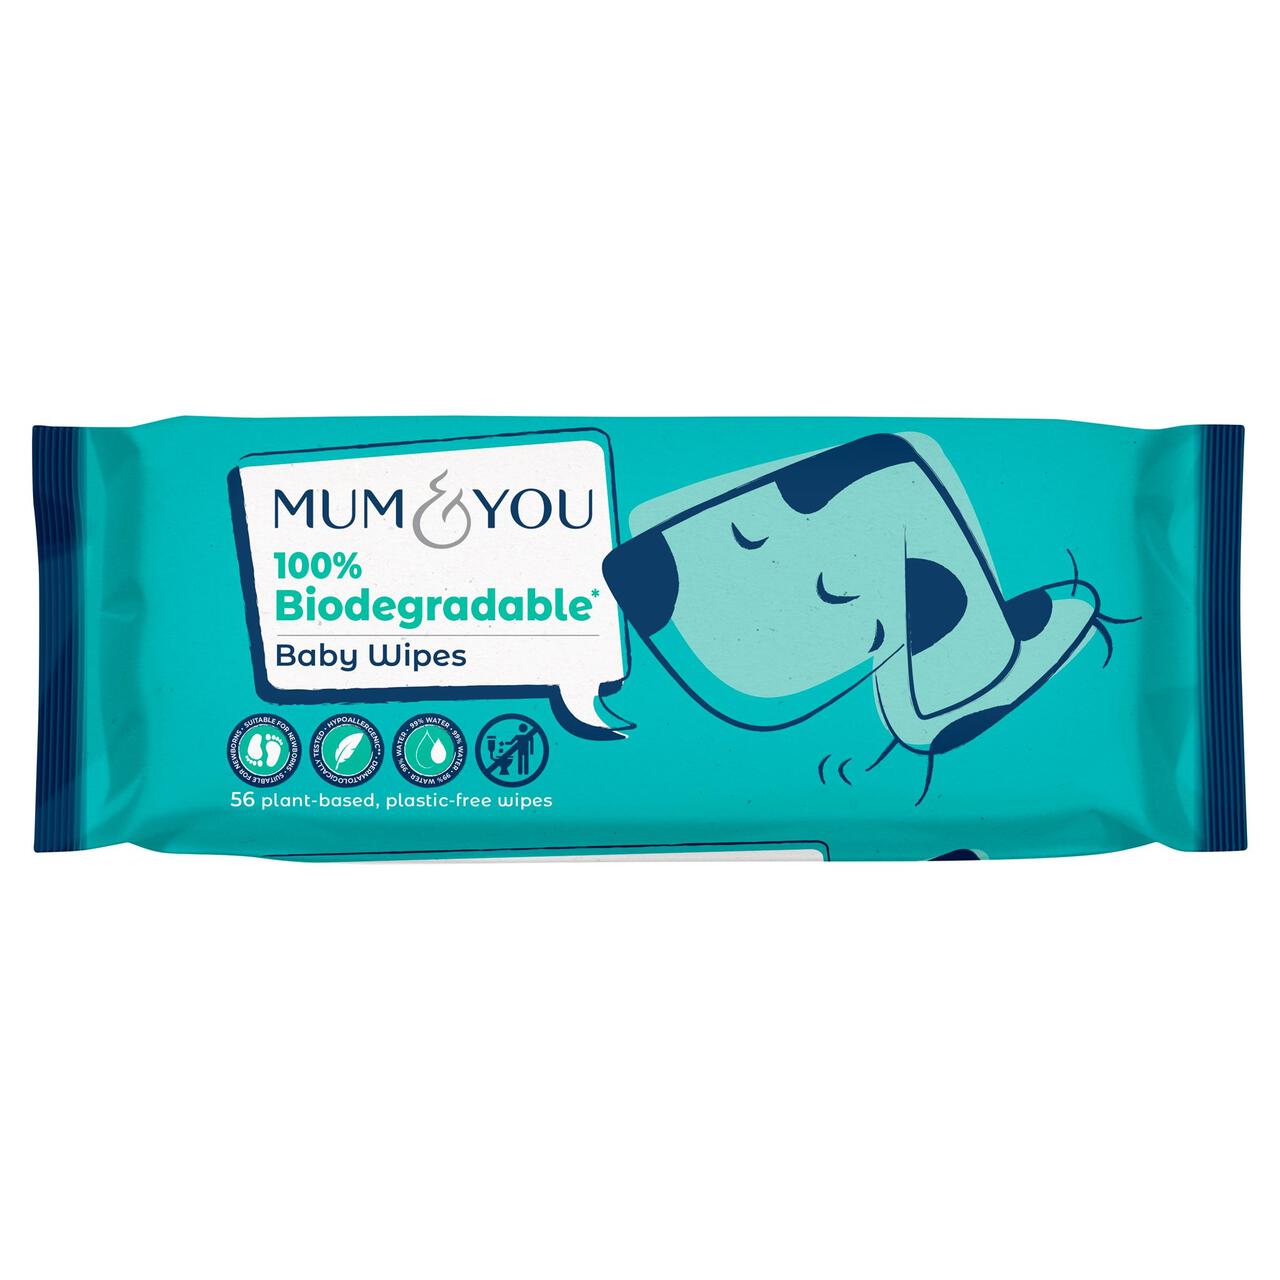 Mum & You 100% Biodegradable Baby Wipes 56 per pack